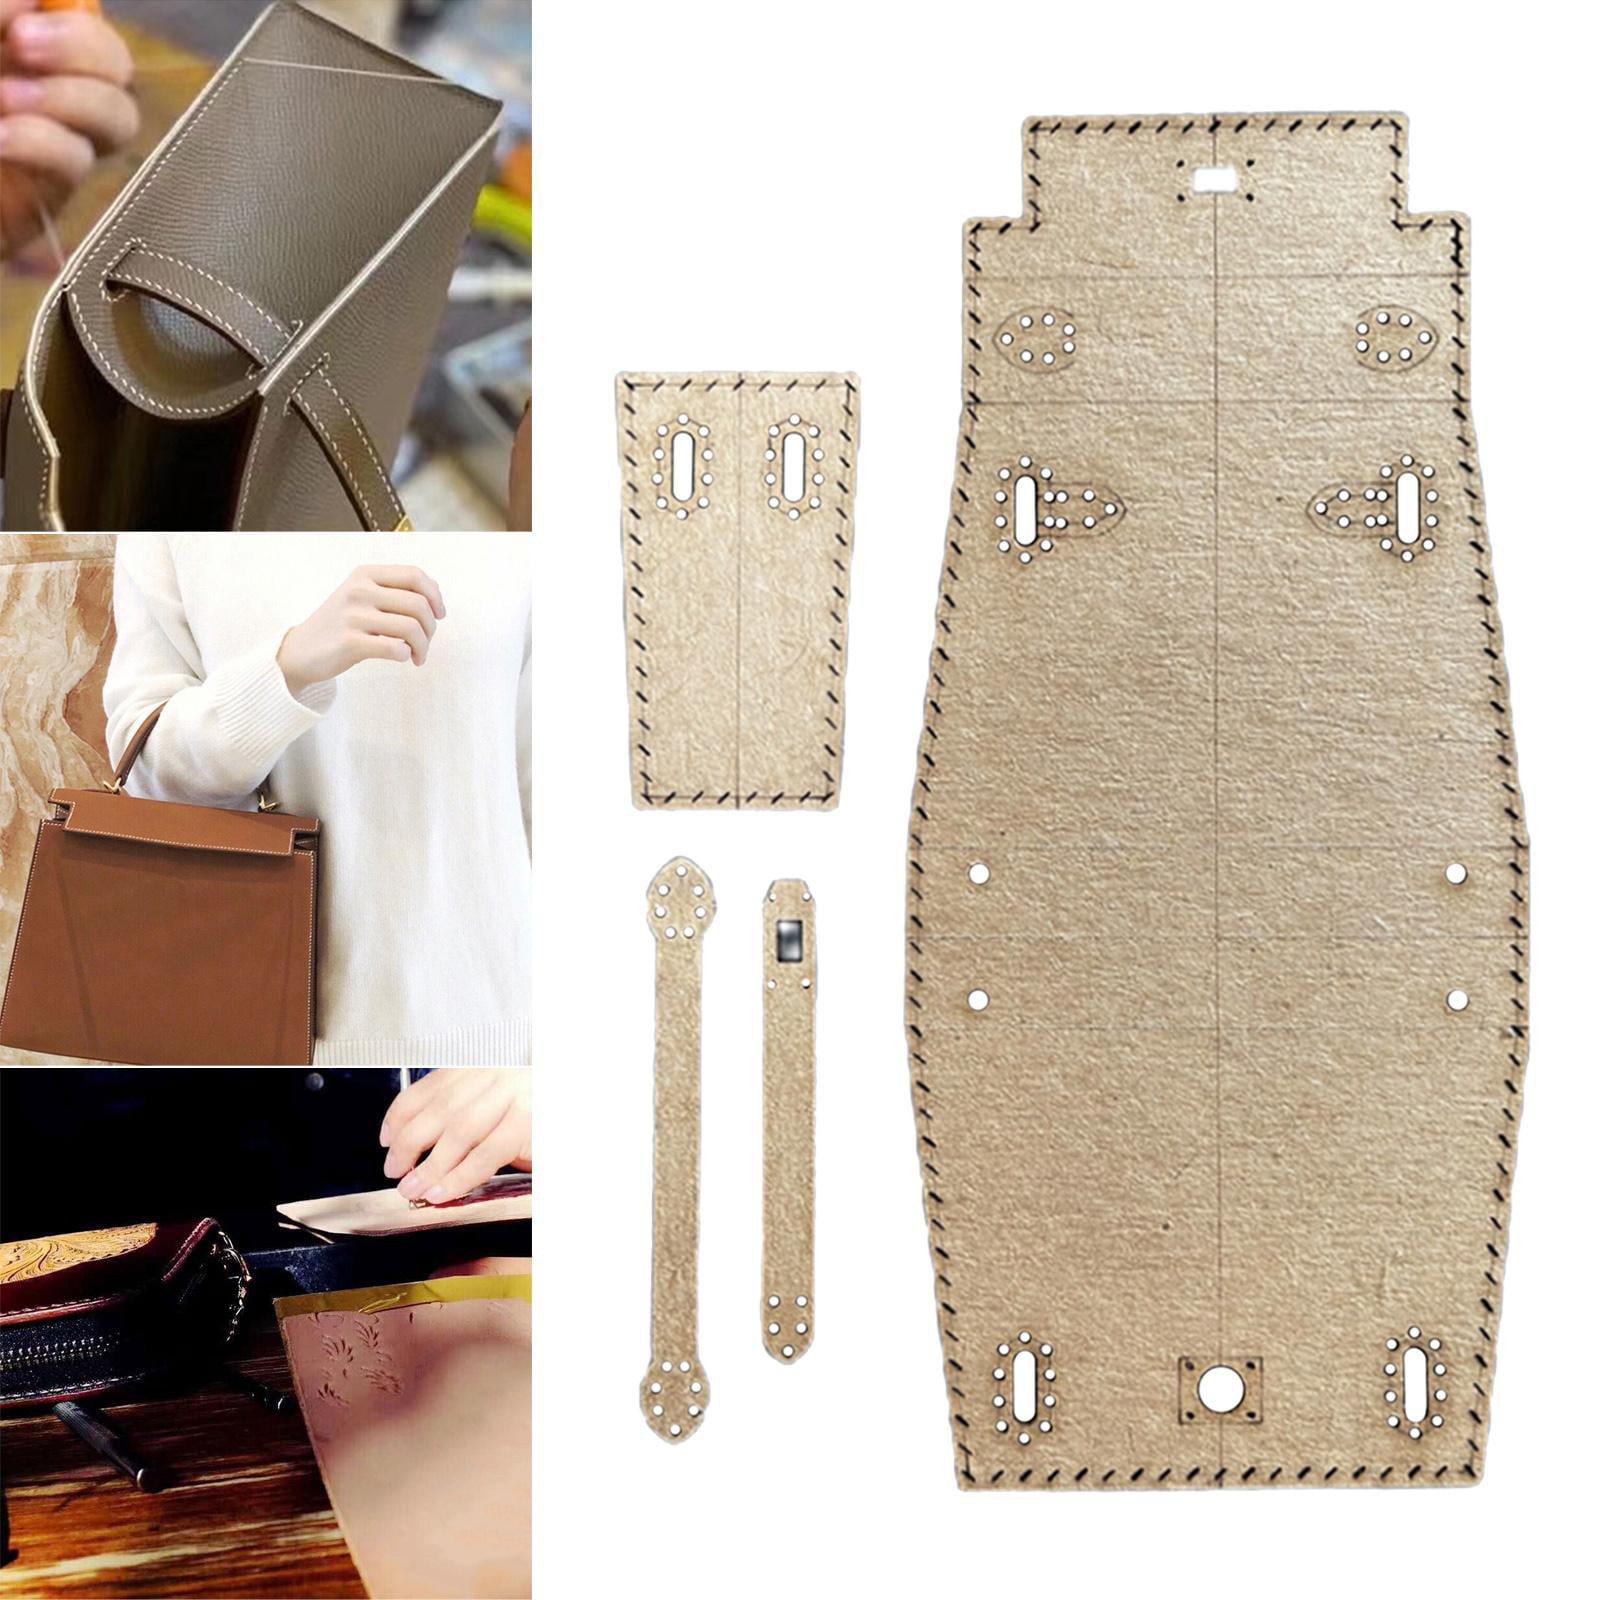 How to Make a Beautiful Handbag Using an Old Cardboard Container? : 11  Steps - Instructables